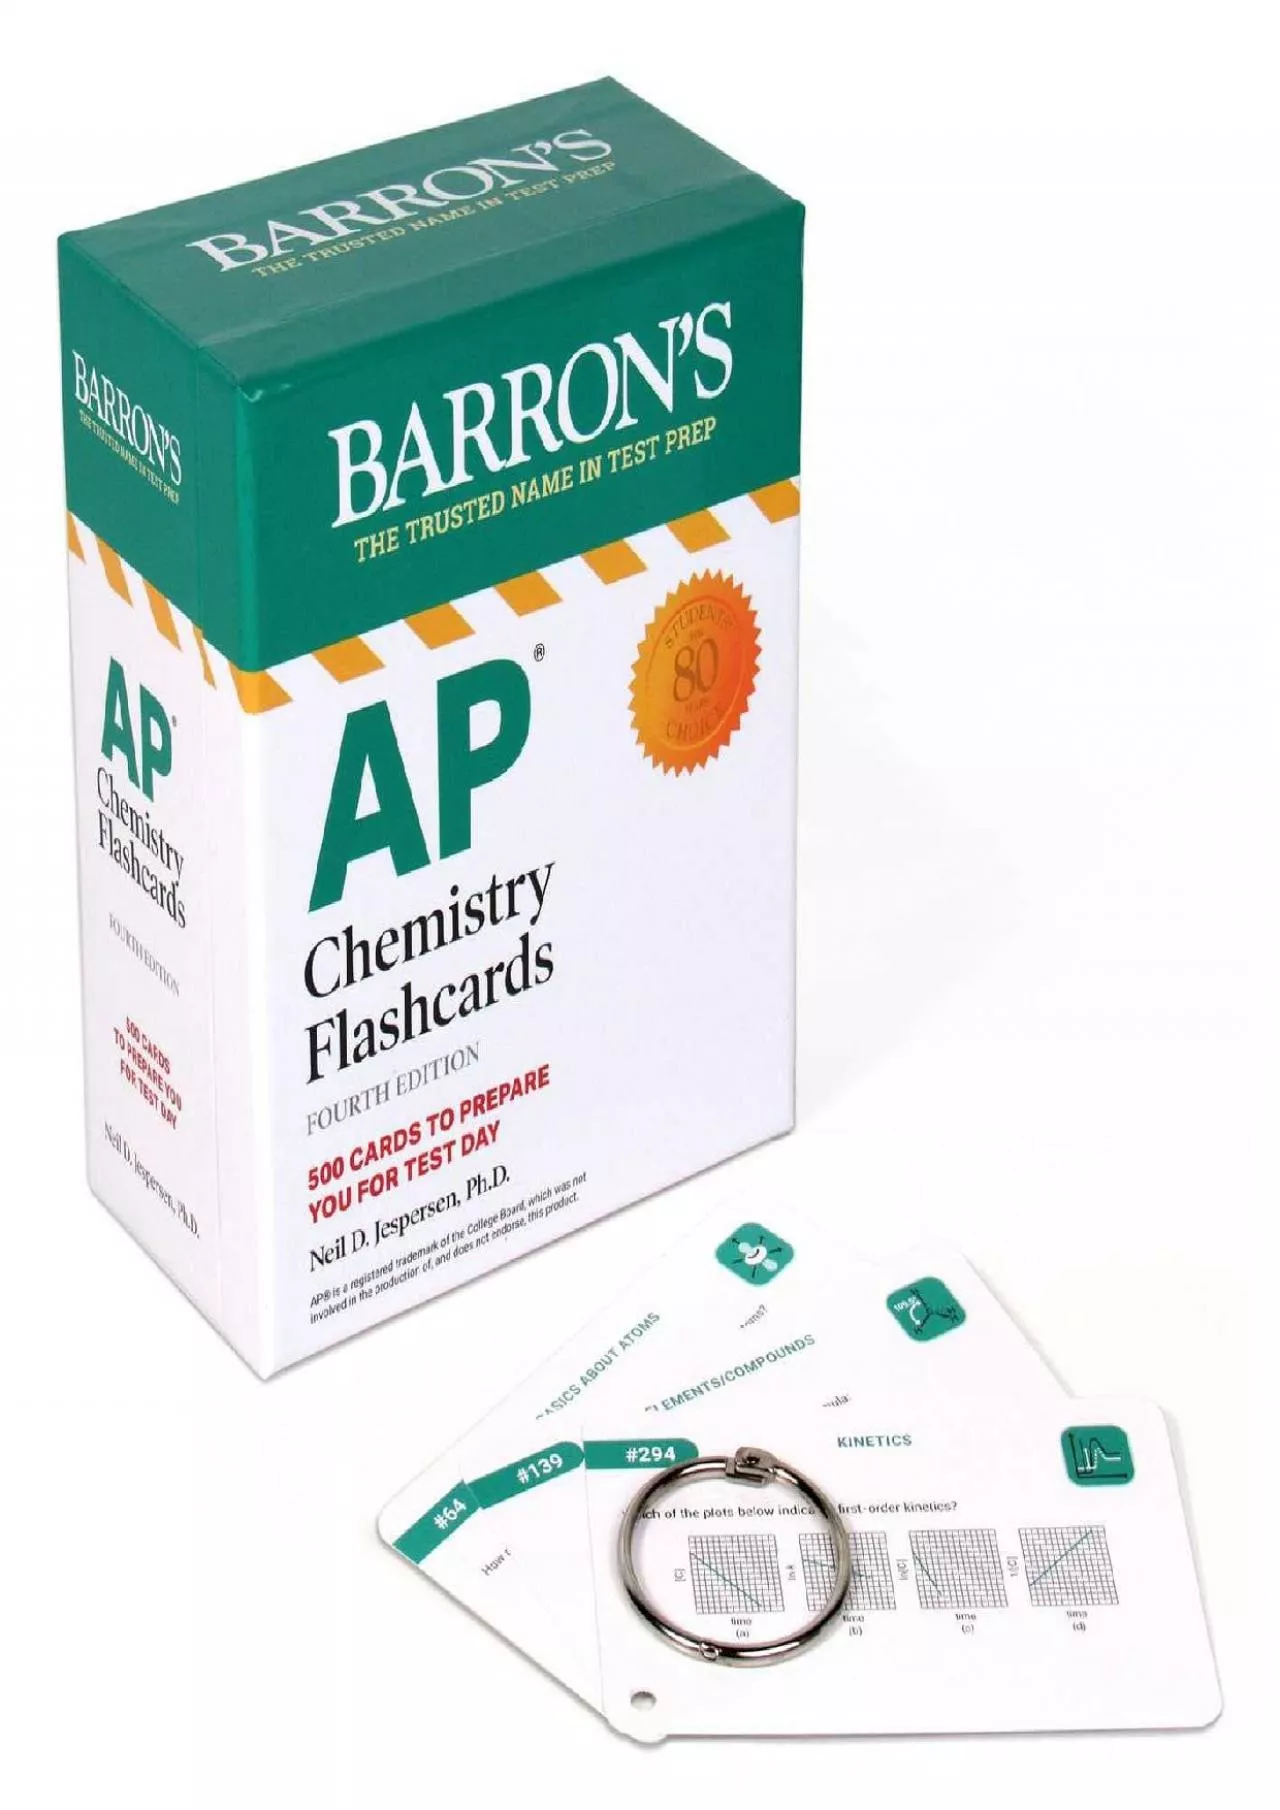 [DOWNLOAD] AP Chemistry Flashcards, Fourth Edition: Up-to-Date Review and Practice + Sorting